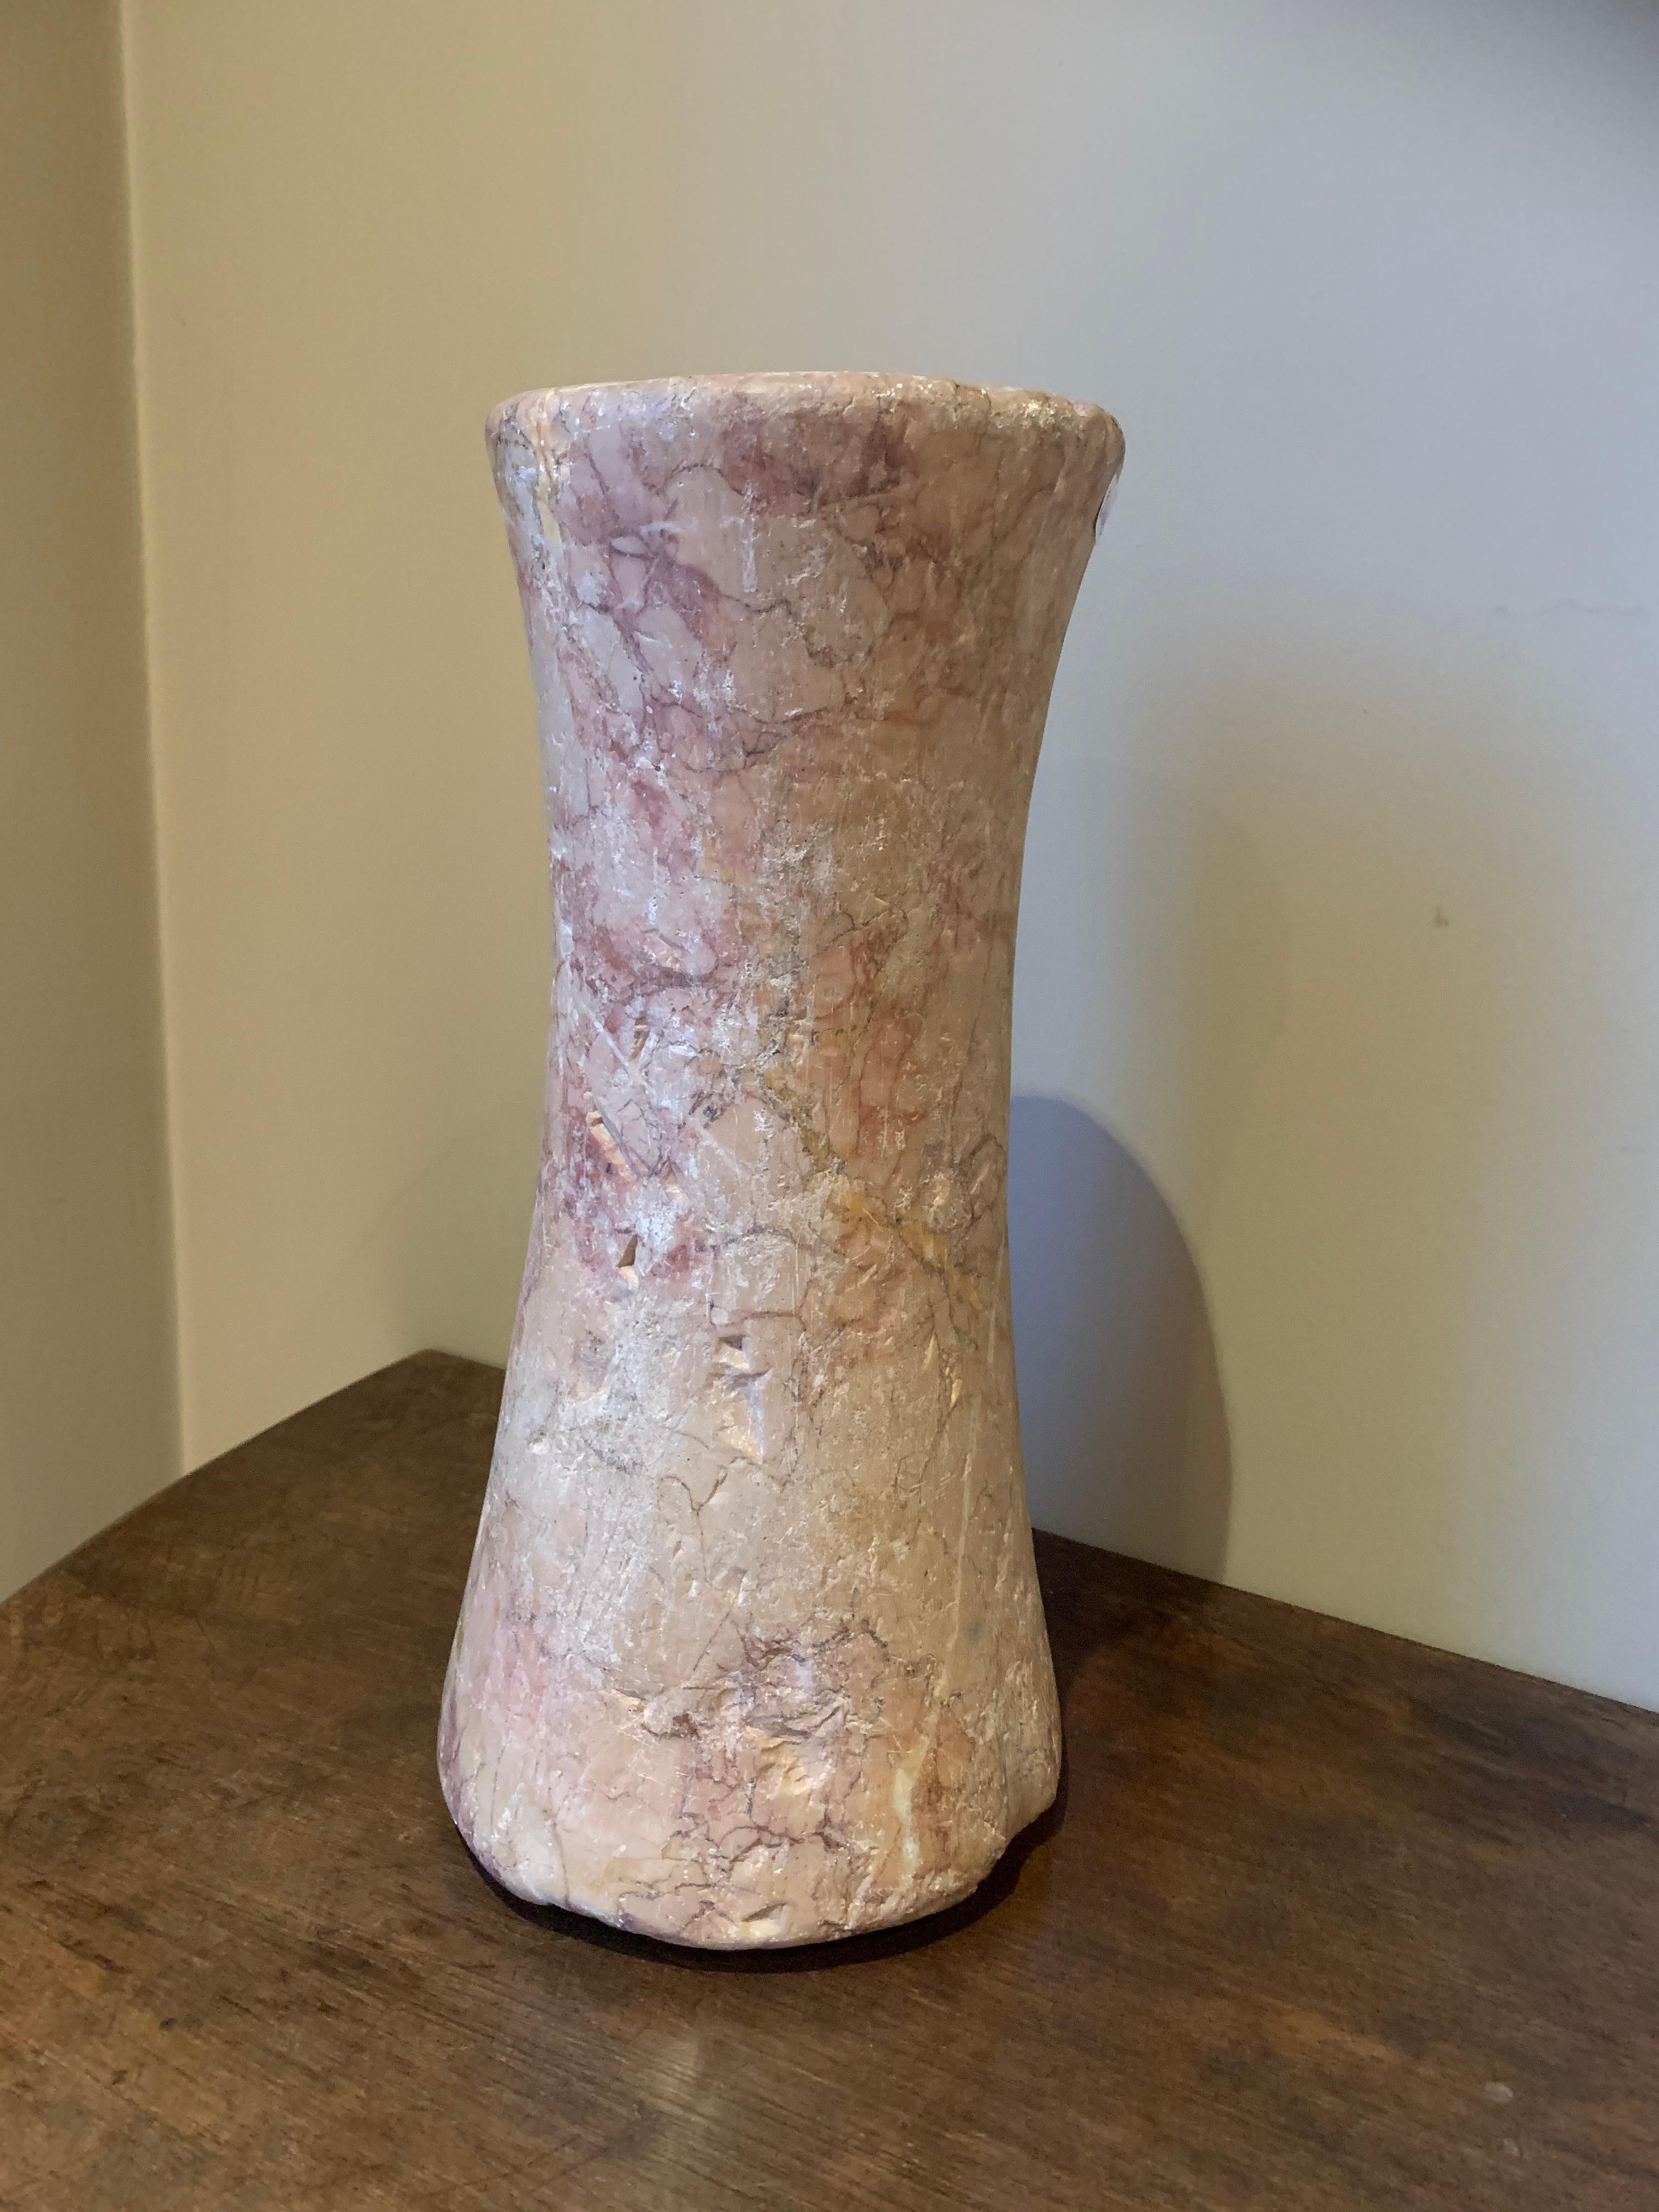 Bactrian marble column idol, circa 3000-2000 BC. It has a elegant tapering form with a undeep groove running on the top. The marble is strikingly vained in a cream pink read color. It has incrustation on the side where it laid on the sand and the